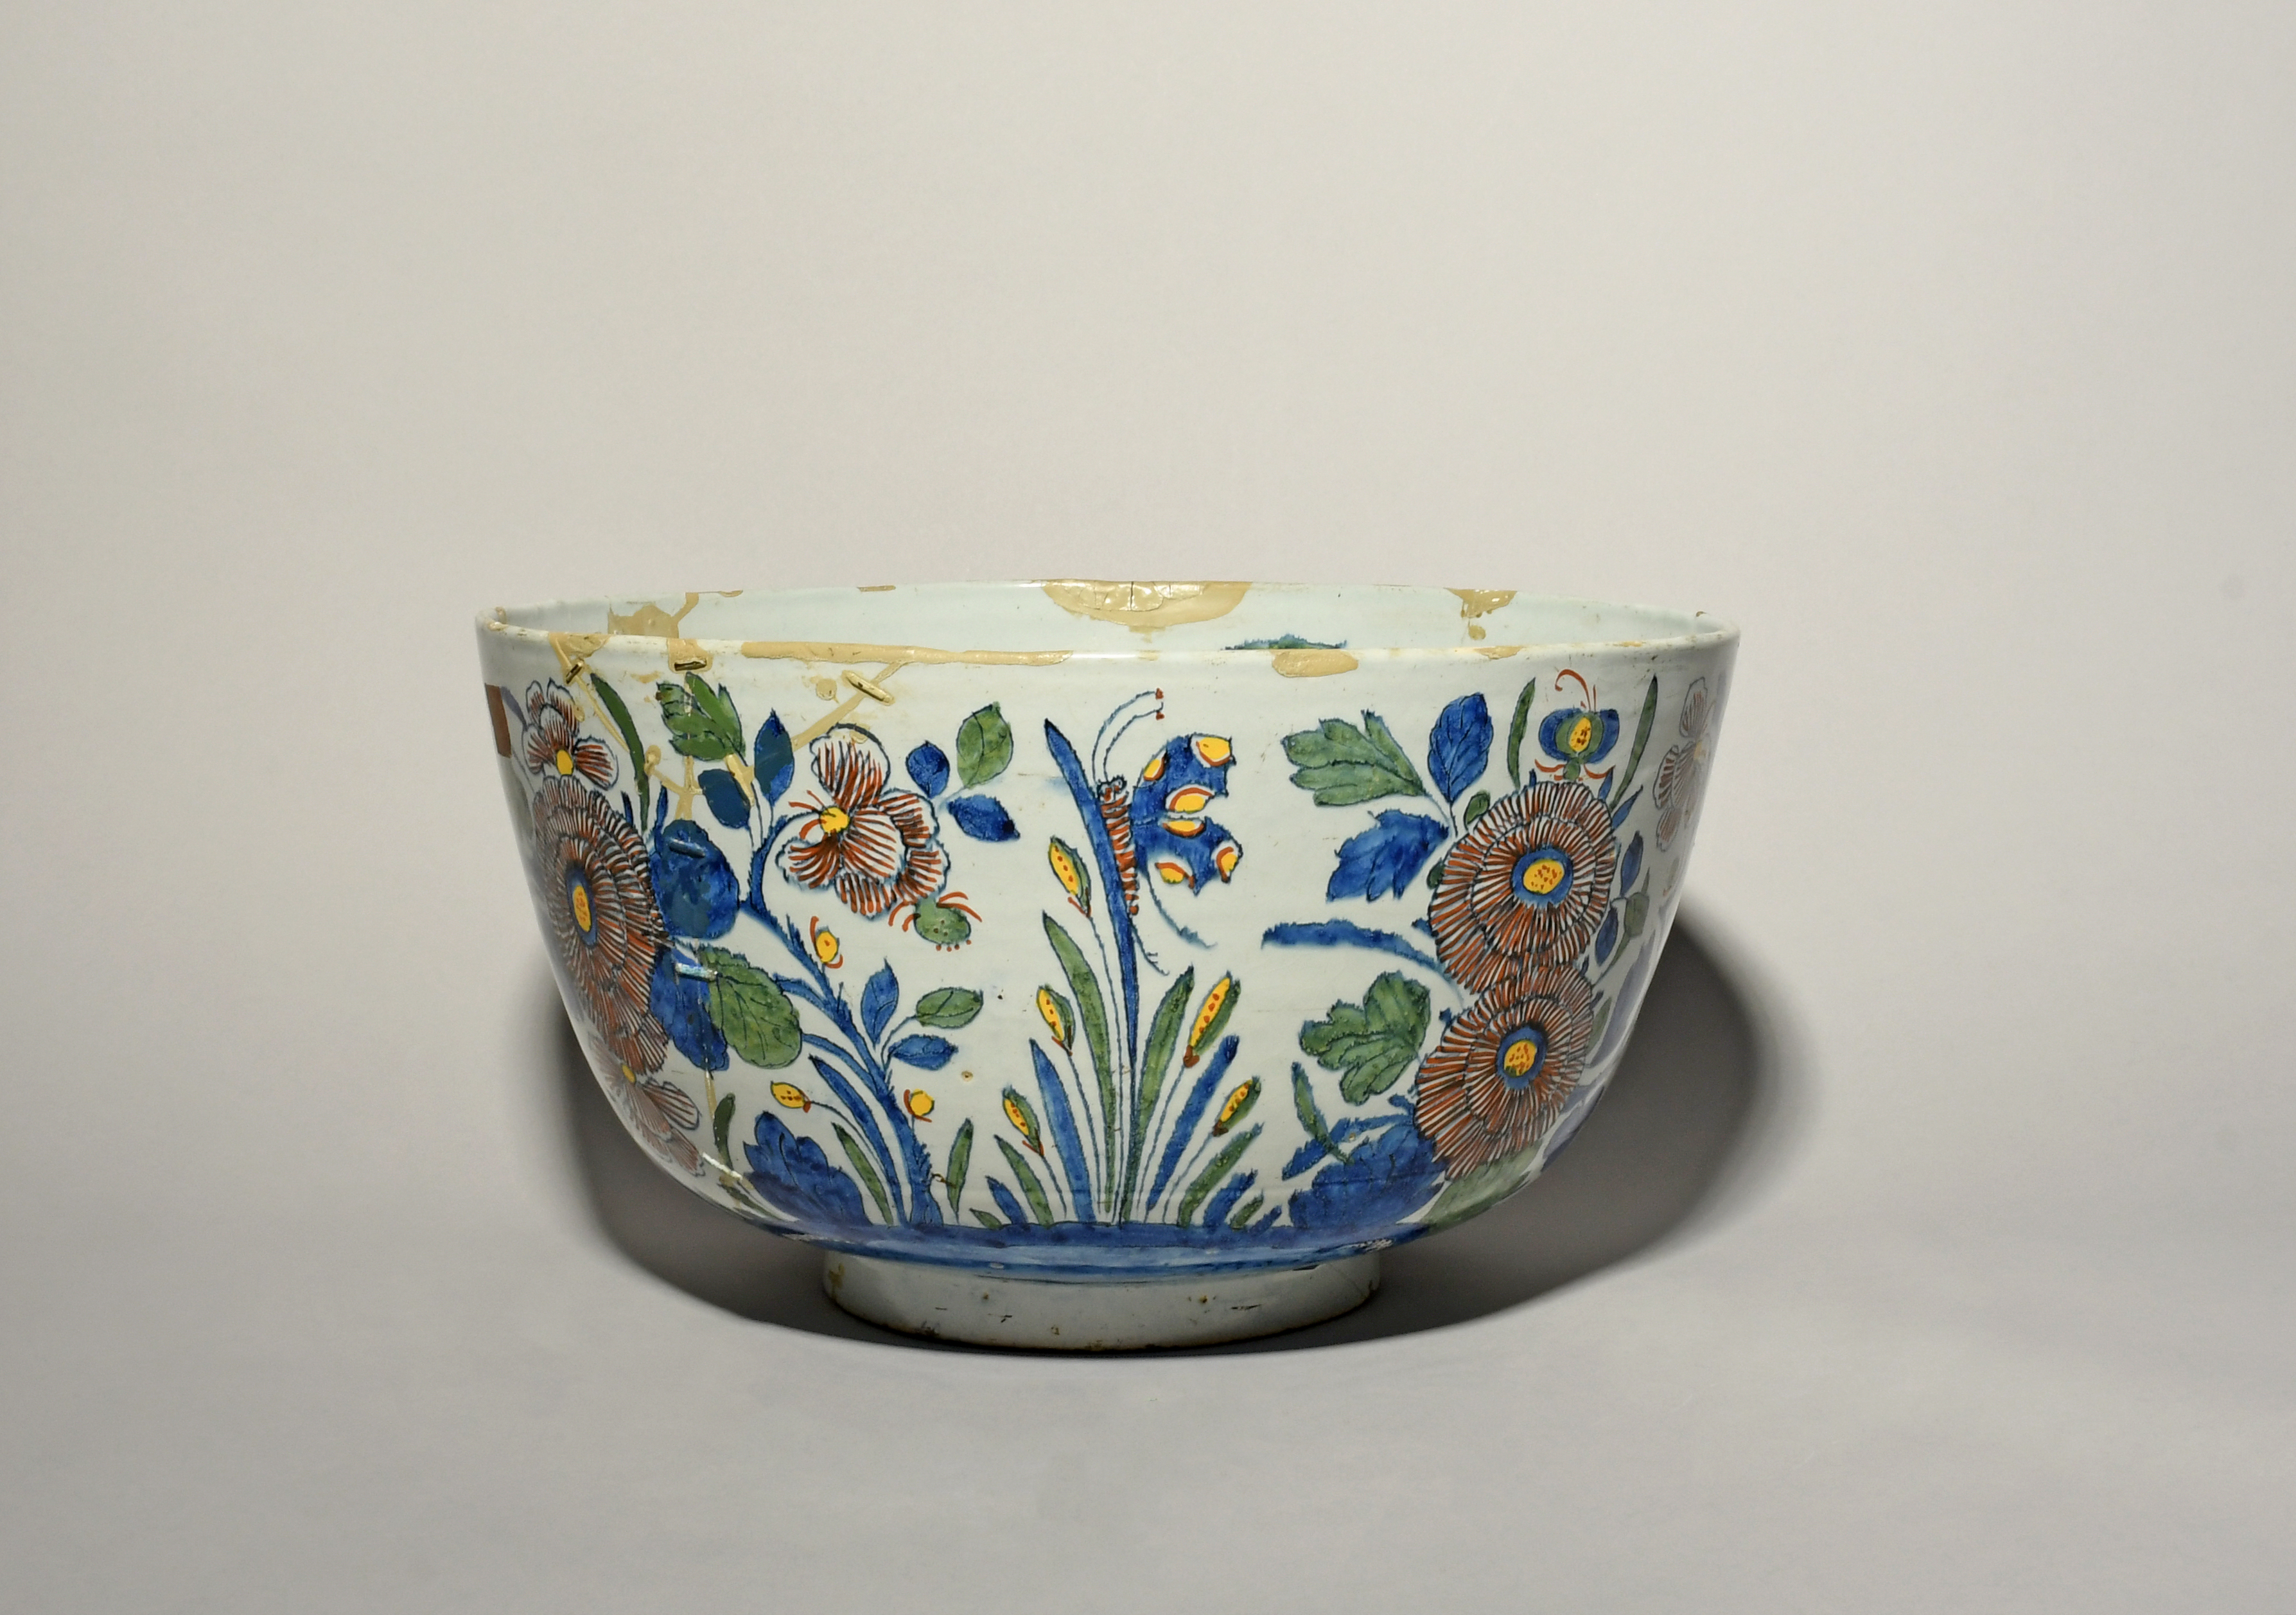 A massive Delft punch bowl, 18th century, boldly painted in polychrome enamels with flowering plants - Image 2 of 3